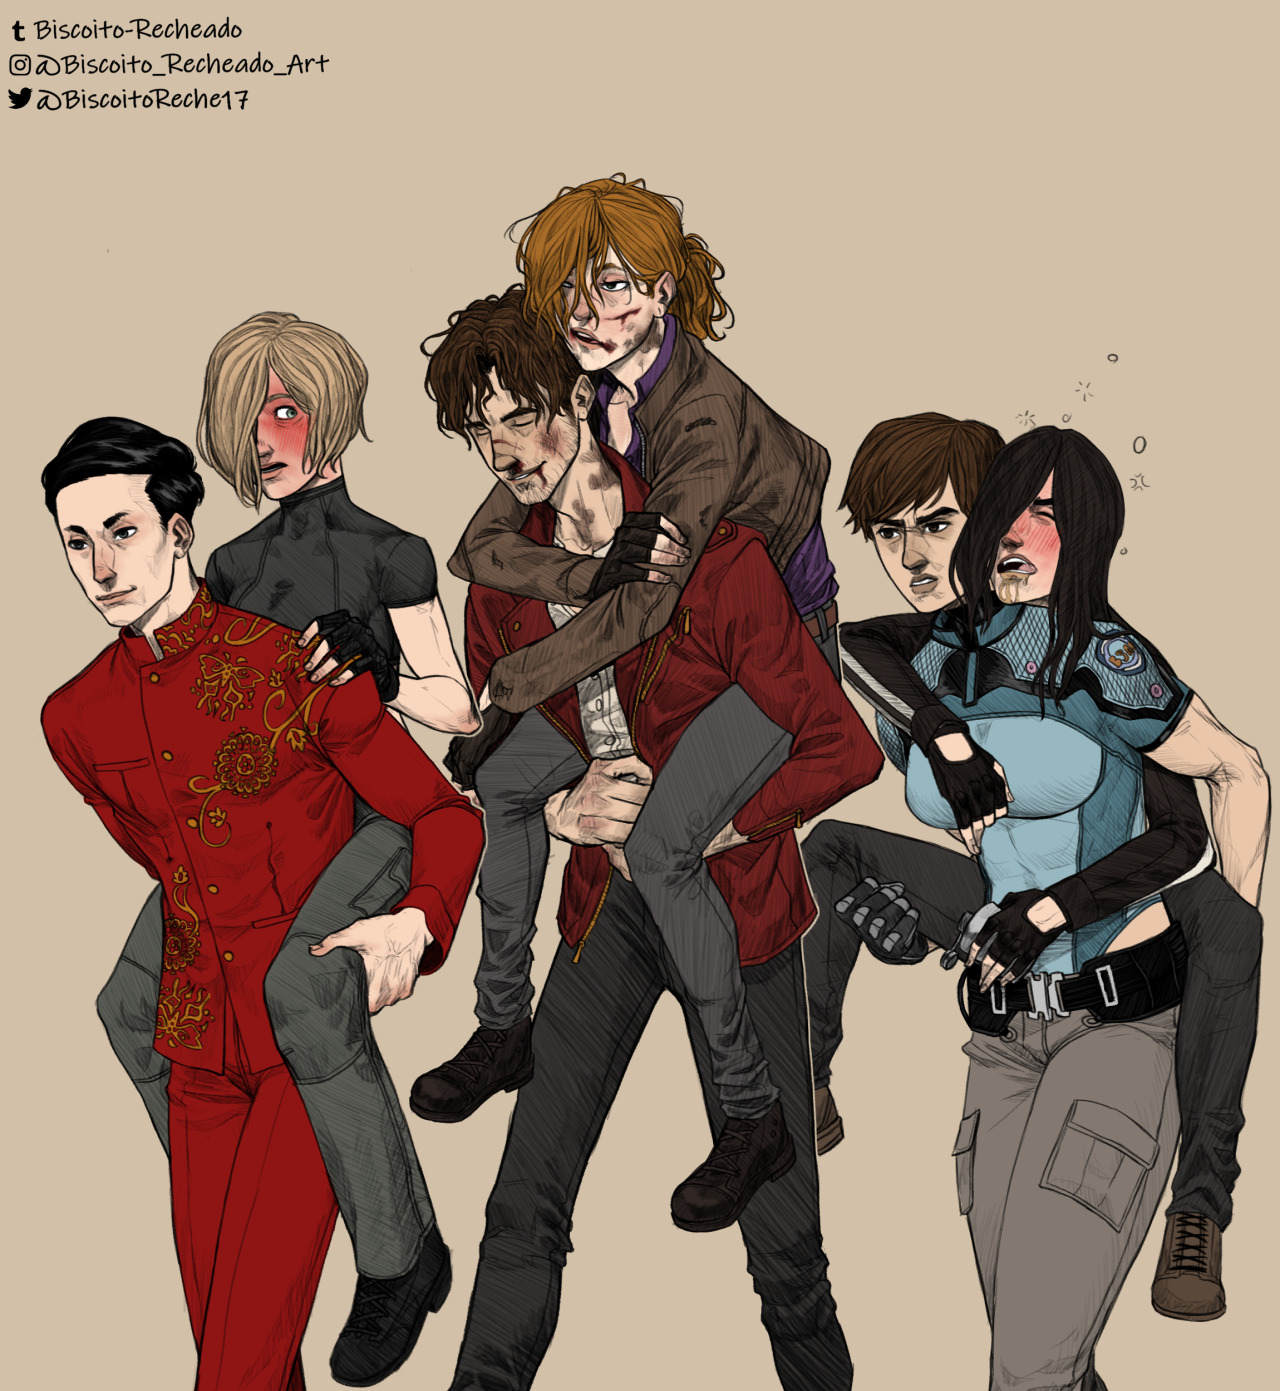 Just a funny idea that i had a while ago about my genderbend version of Resident Evil, where Leon (Lara? Lana?...) really likes piggyback #resident evil#re4#re vendetta#reid #resident evil vendetta  #resident evil infinite darkness  #resident evil 4 #claire redfield#Chris Redfield #leon scott kennedy #ada wong#genderswap#genderbend#rule 63#r63#femal version#male version#character art#game#horror#piggyback#capcom#fanart#art#ilustration